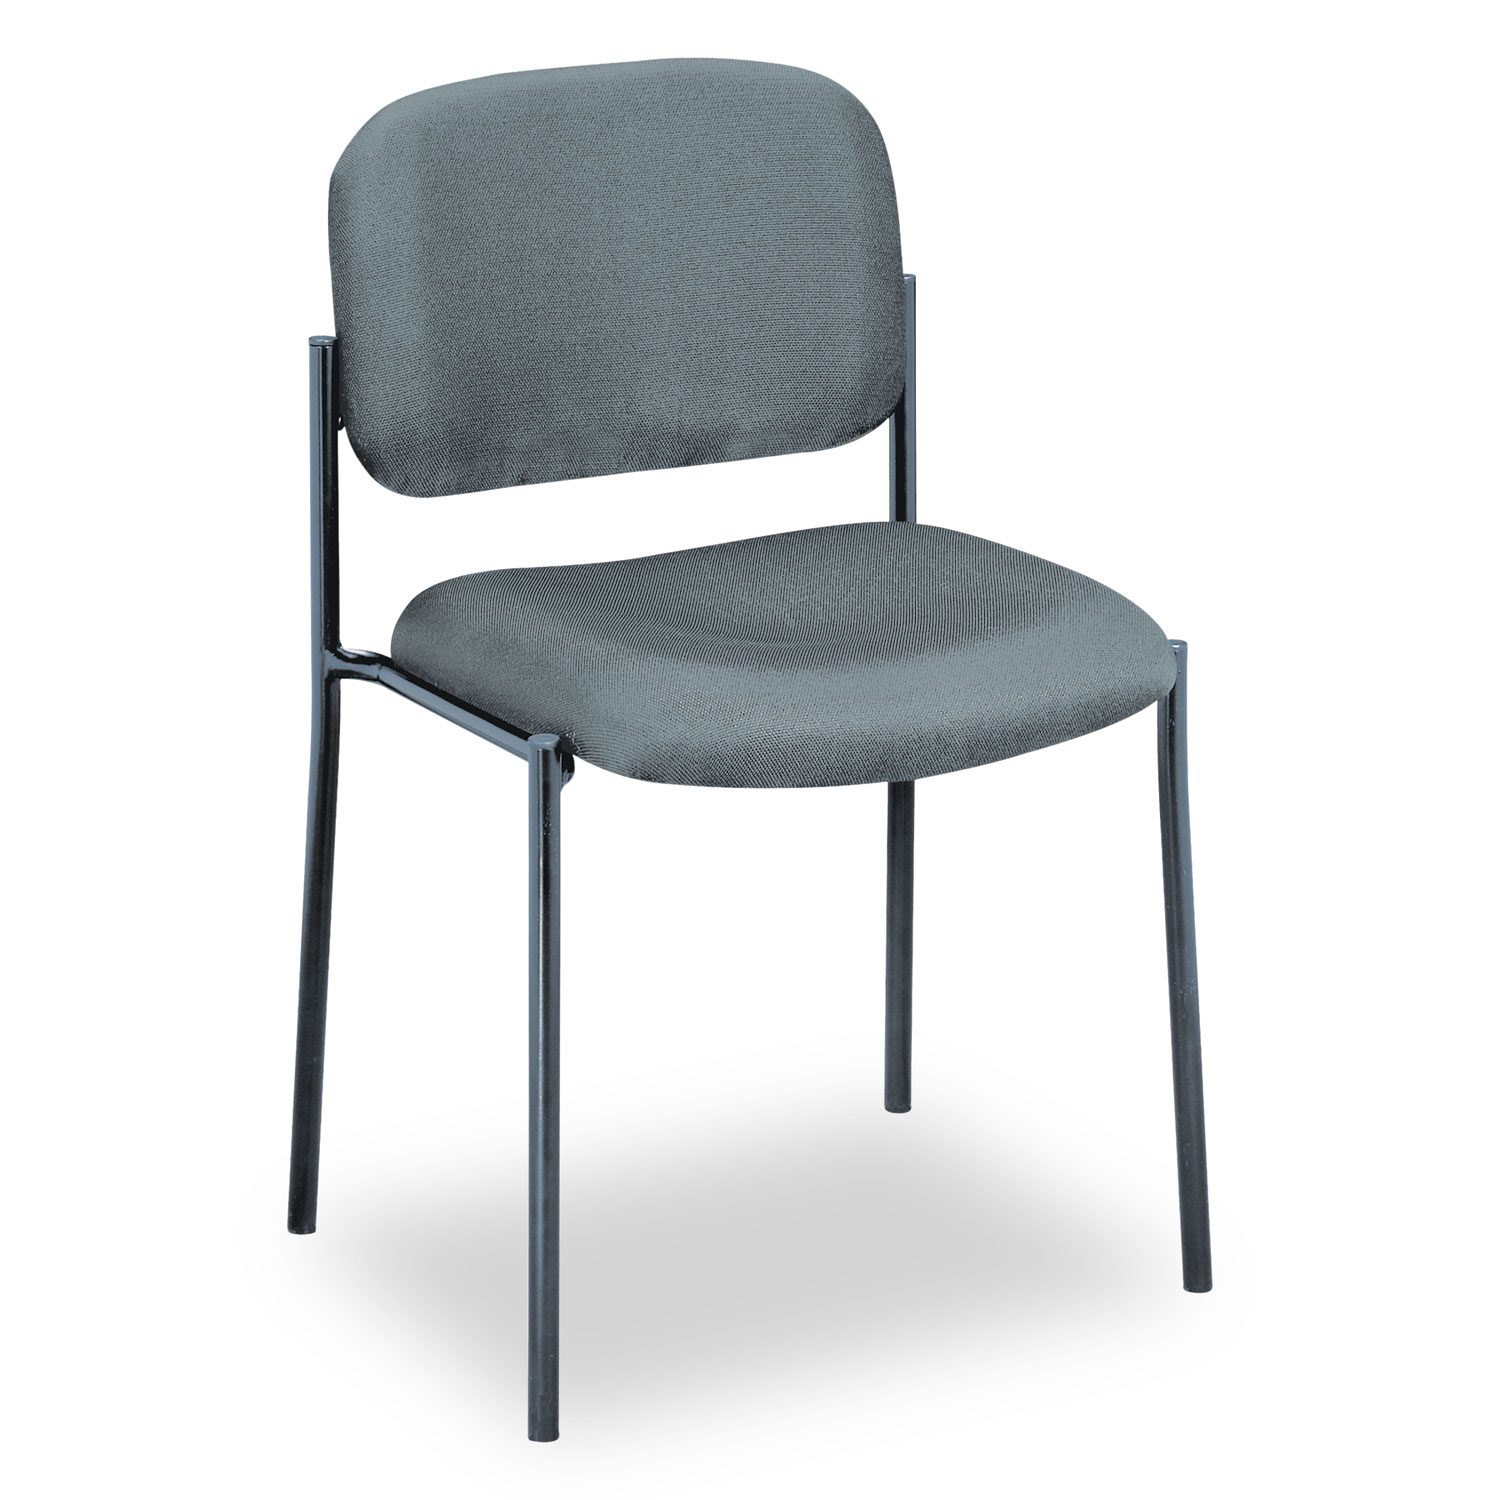 VL606 Series Stacking Armless Guest Chair, Charcoal Fabric